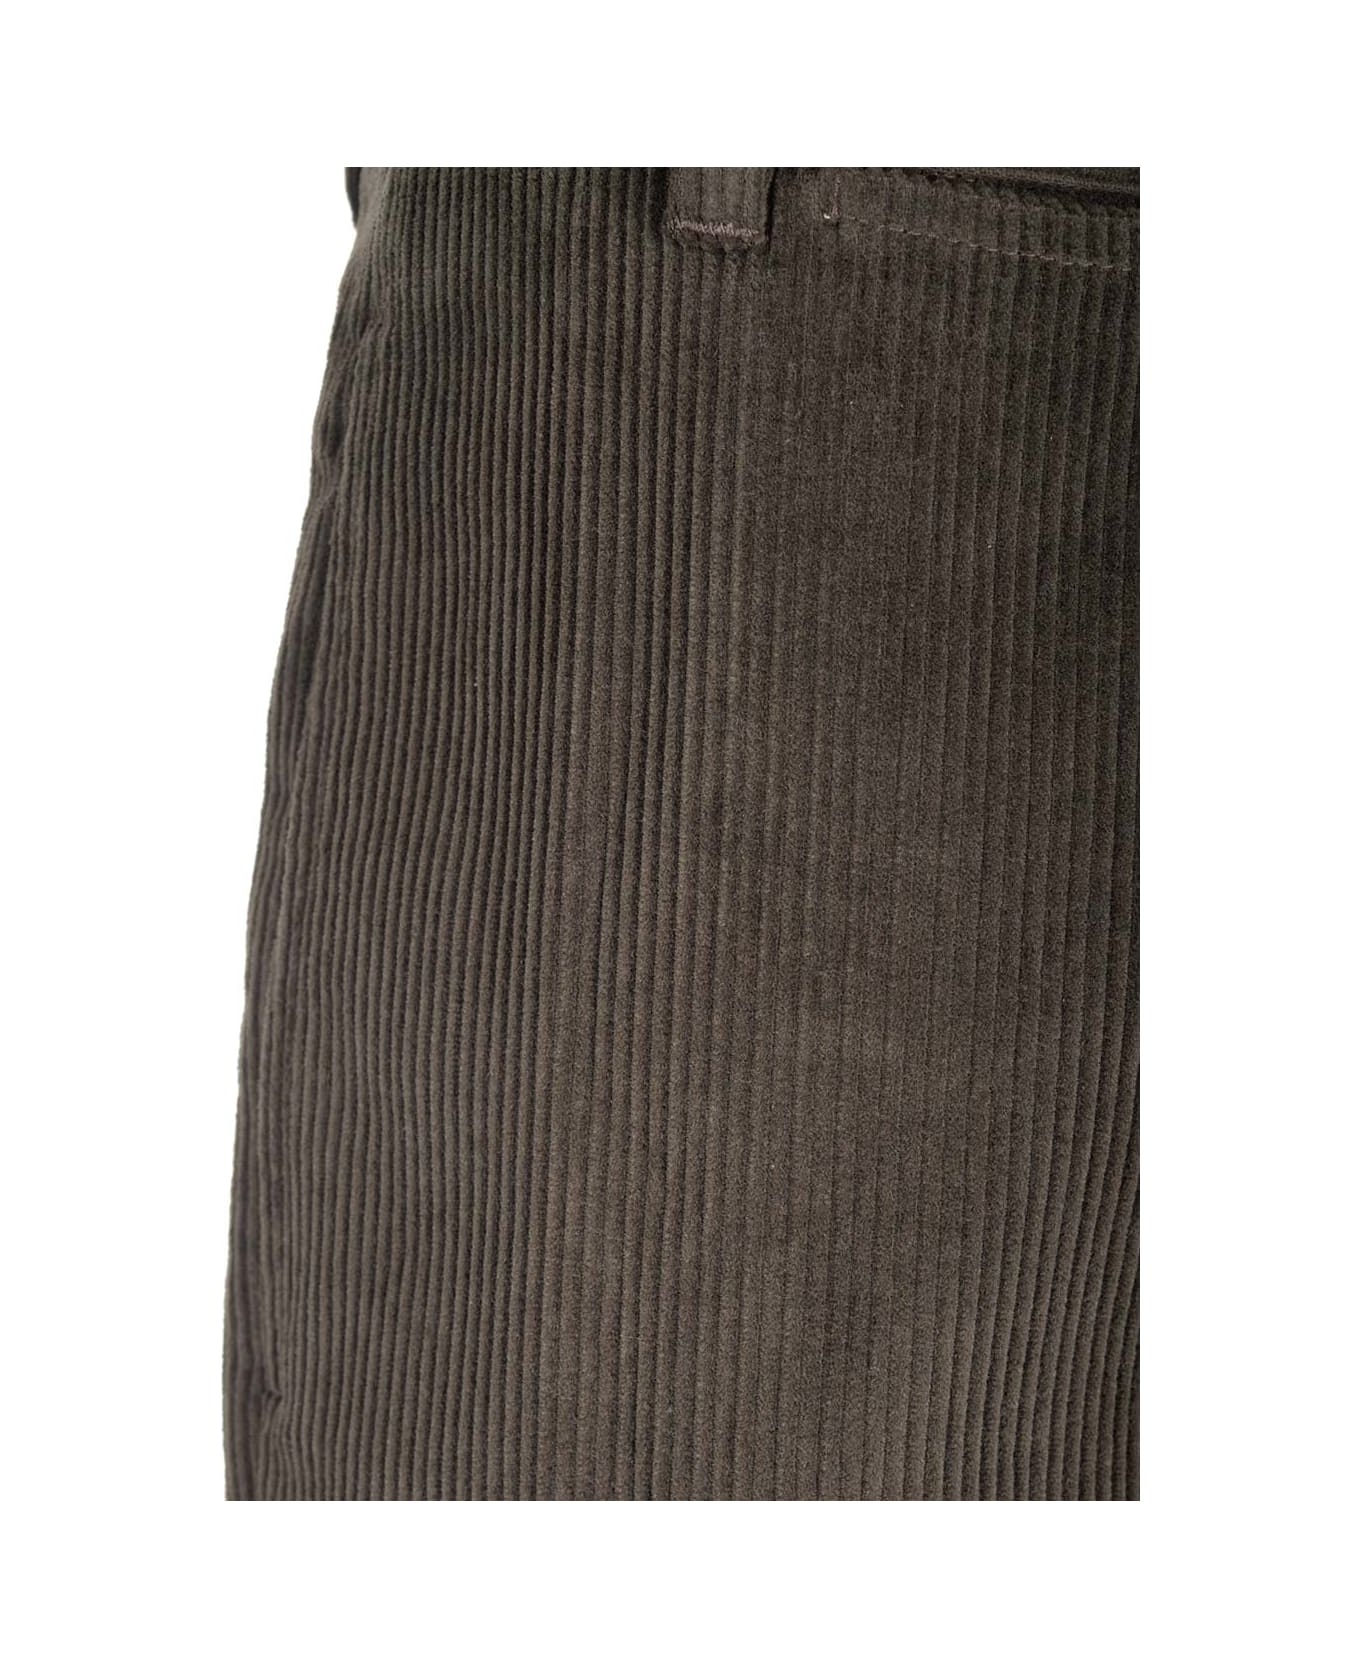 Thom Browne Corduroy Cropped Trousers - BROWN  